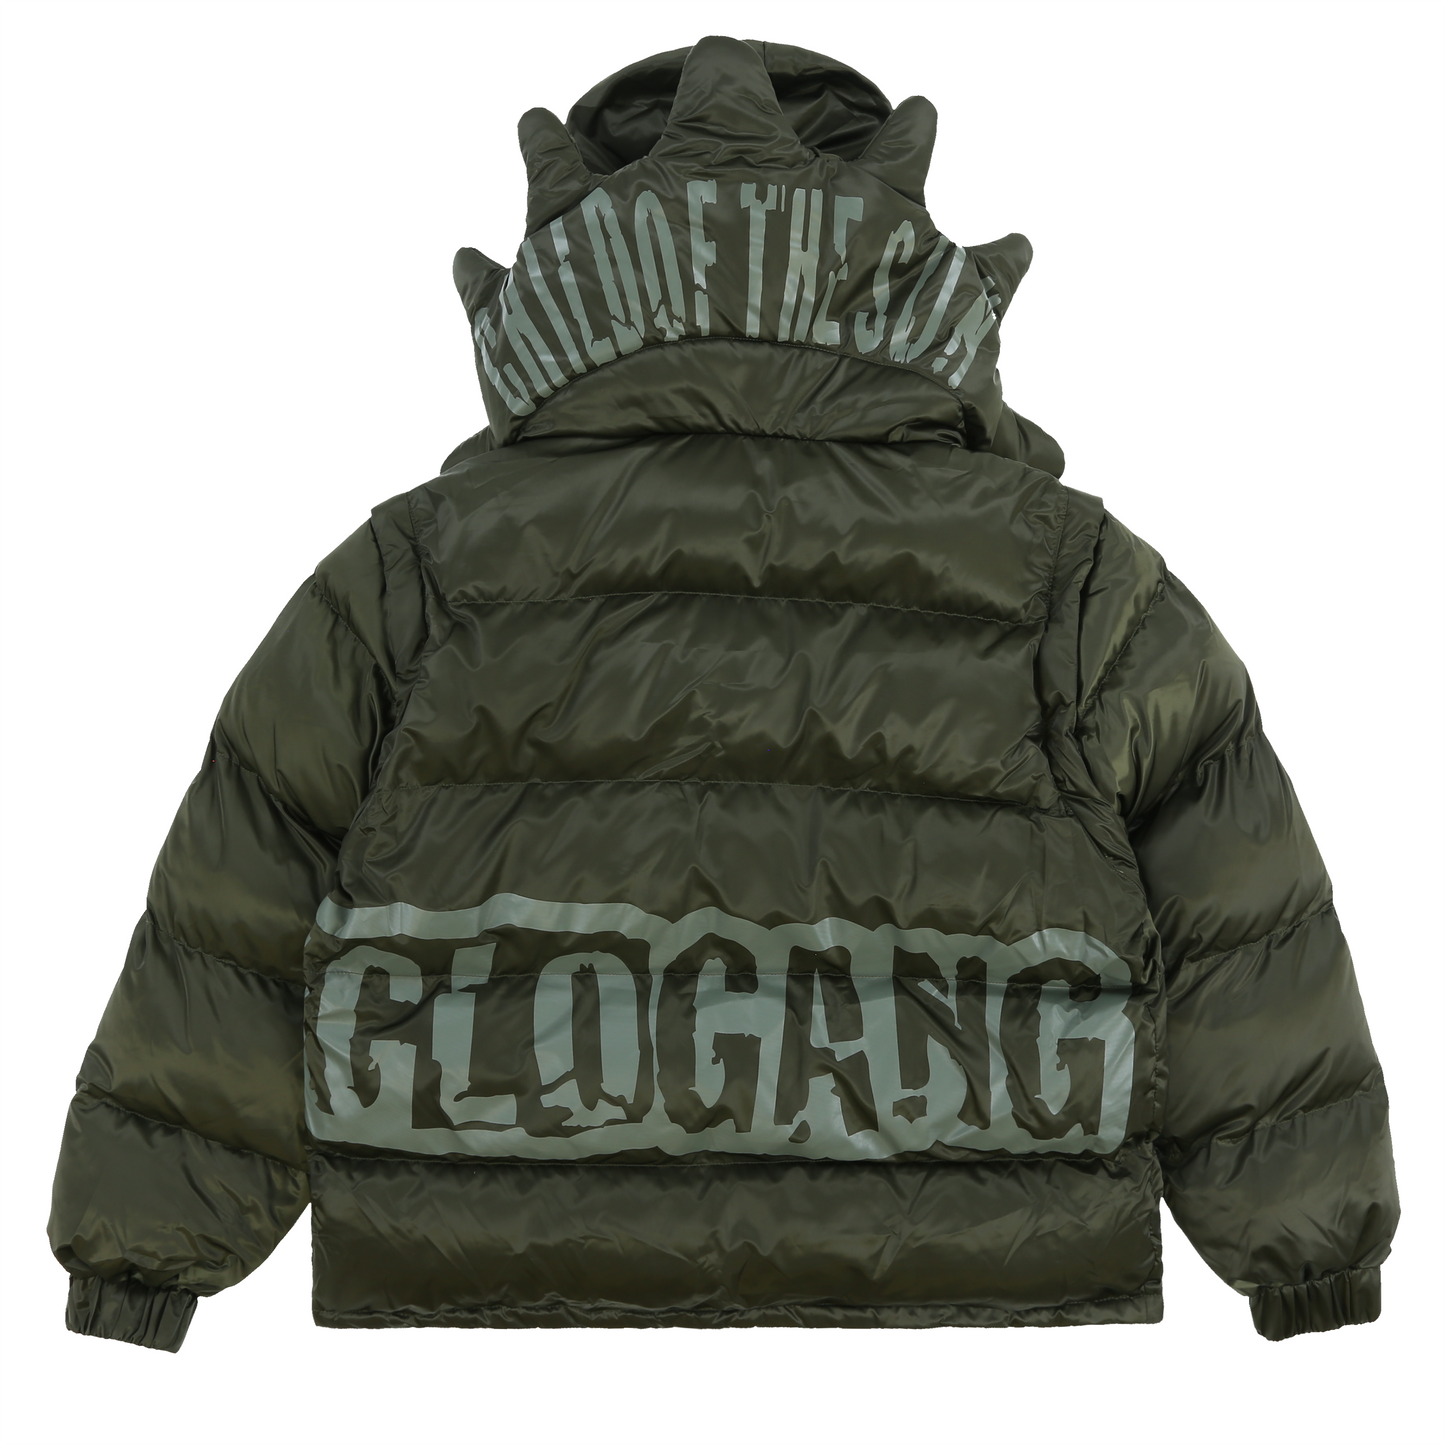 Glocler Flare Collar Puffer Jacket (Olive)